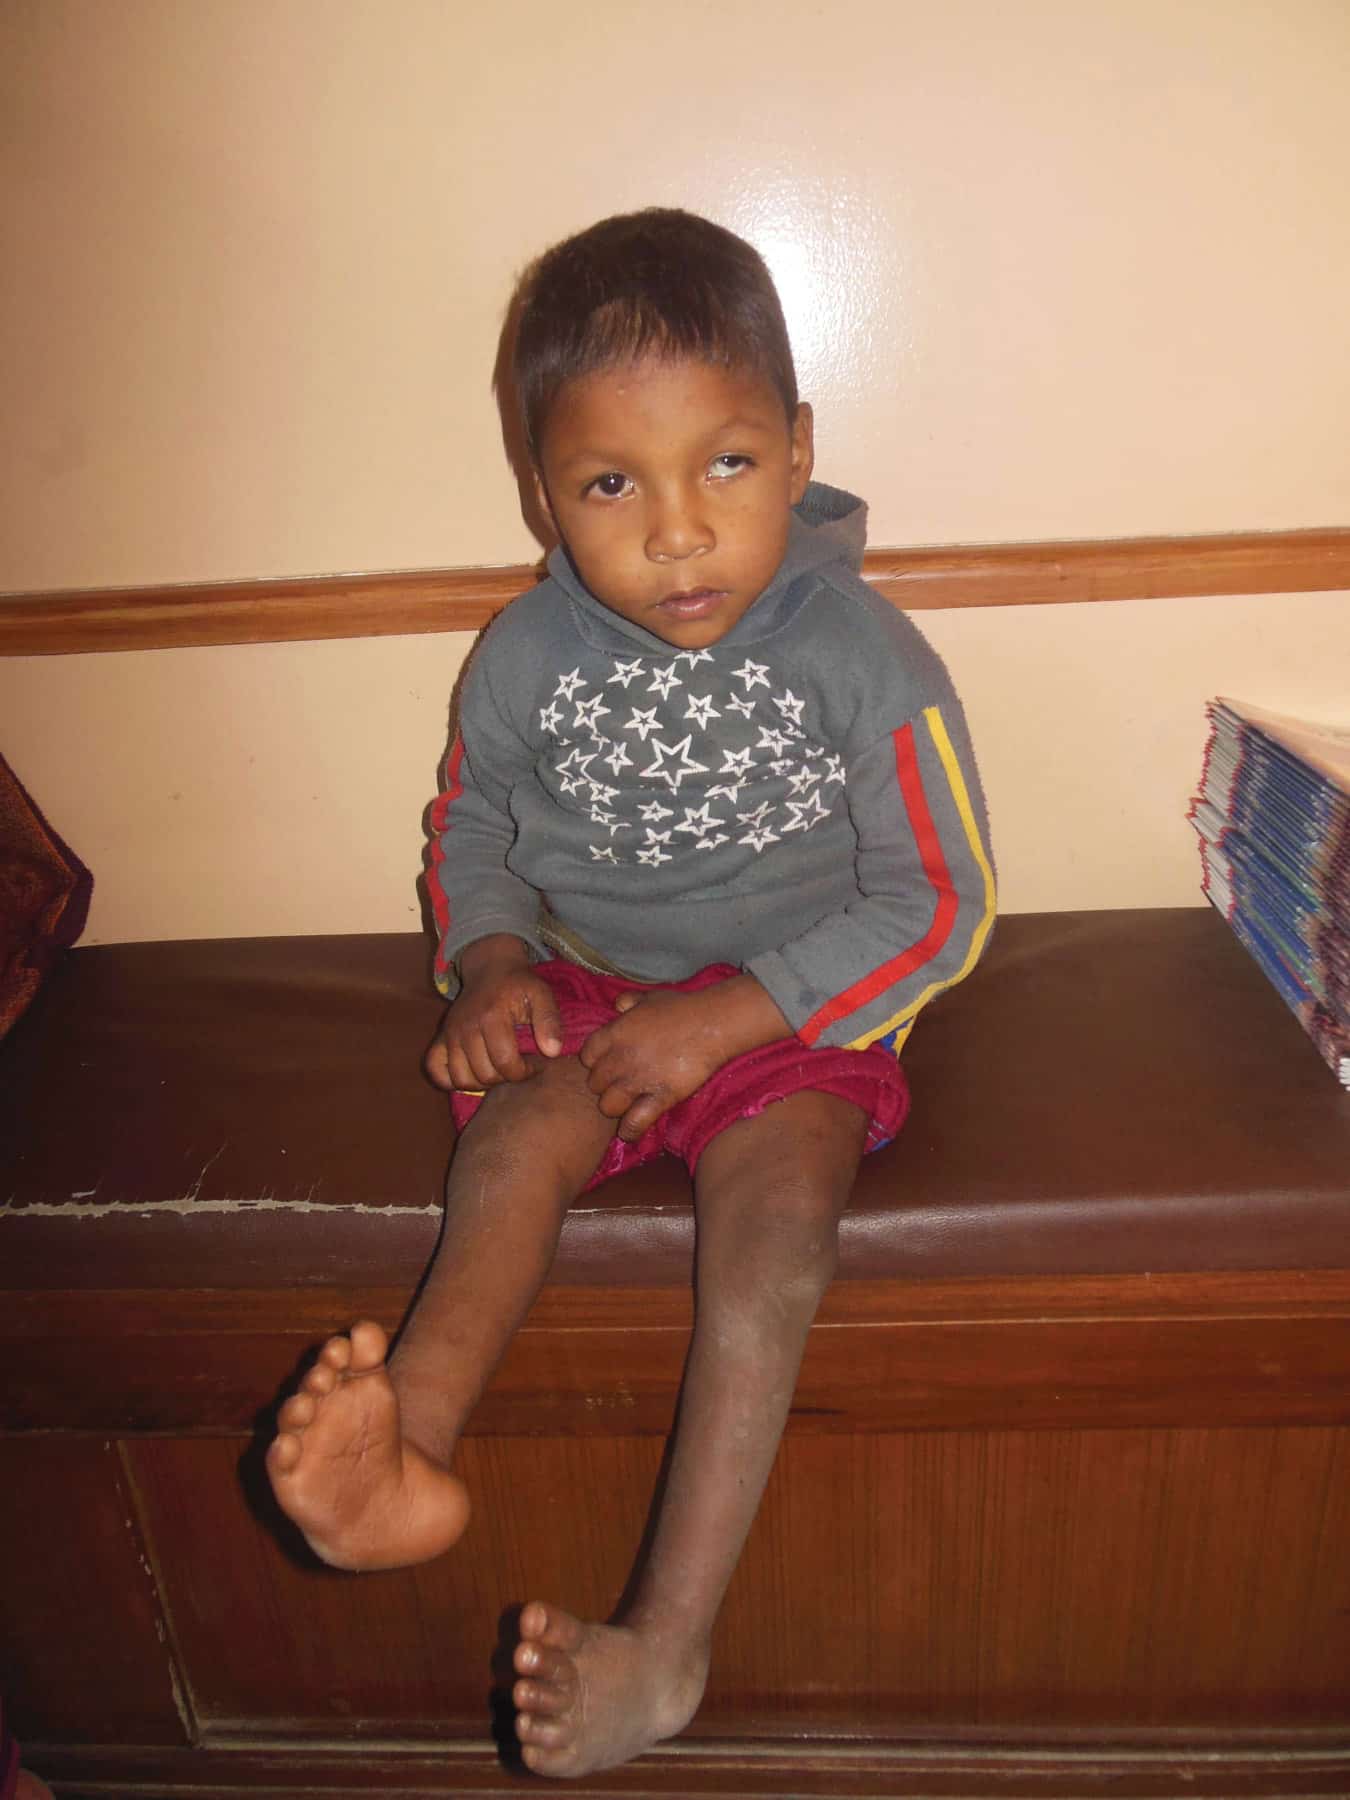 Sumit before he received help from Samaritan’s Purse’s “Patient Navigation Program”.